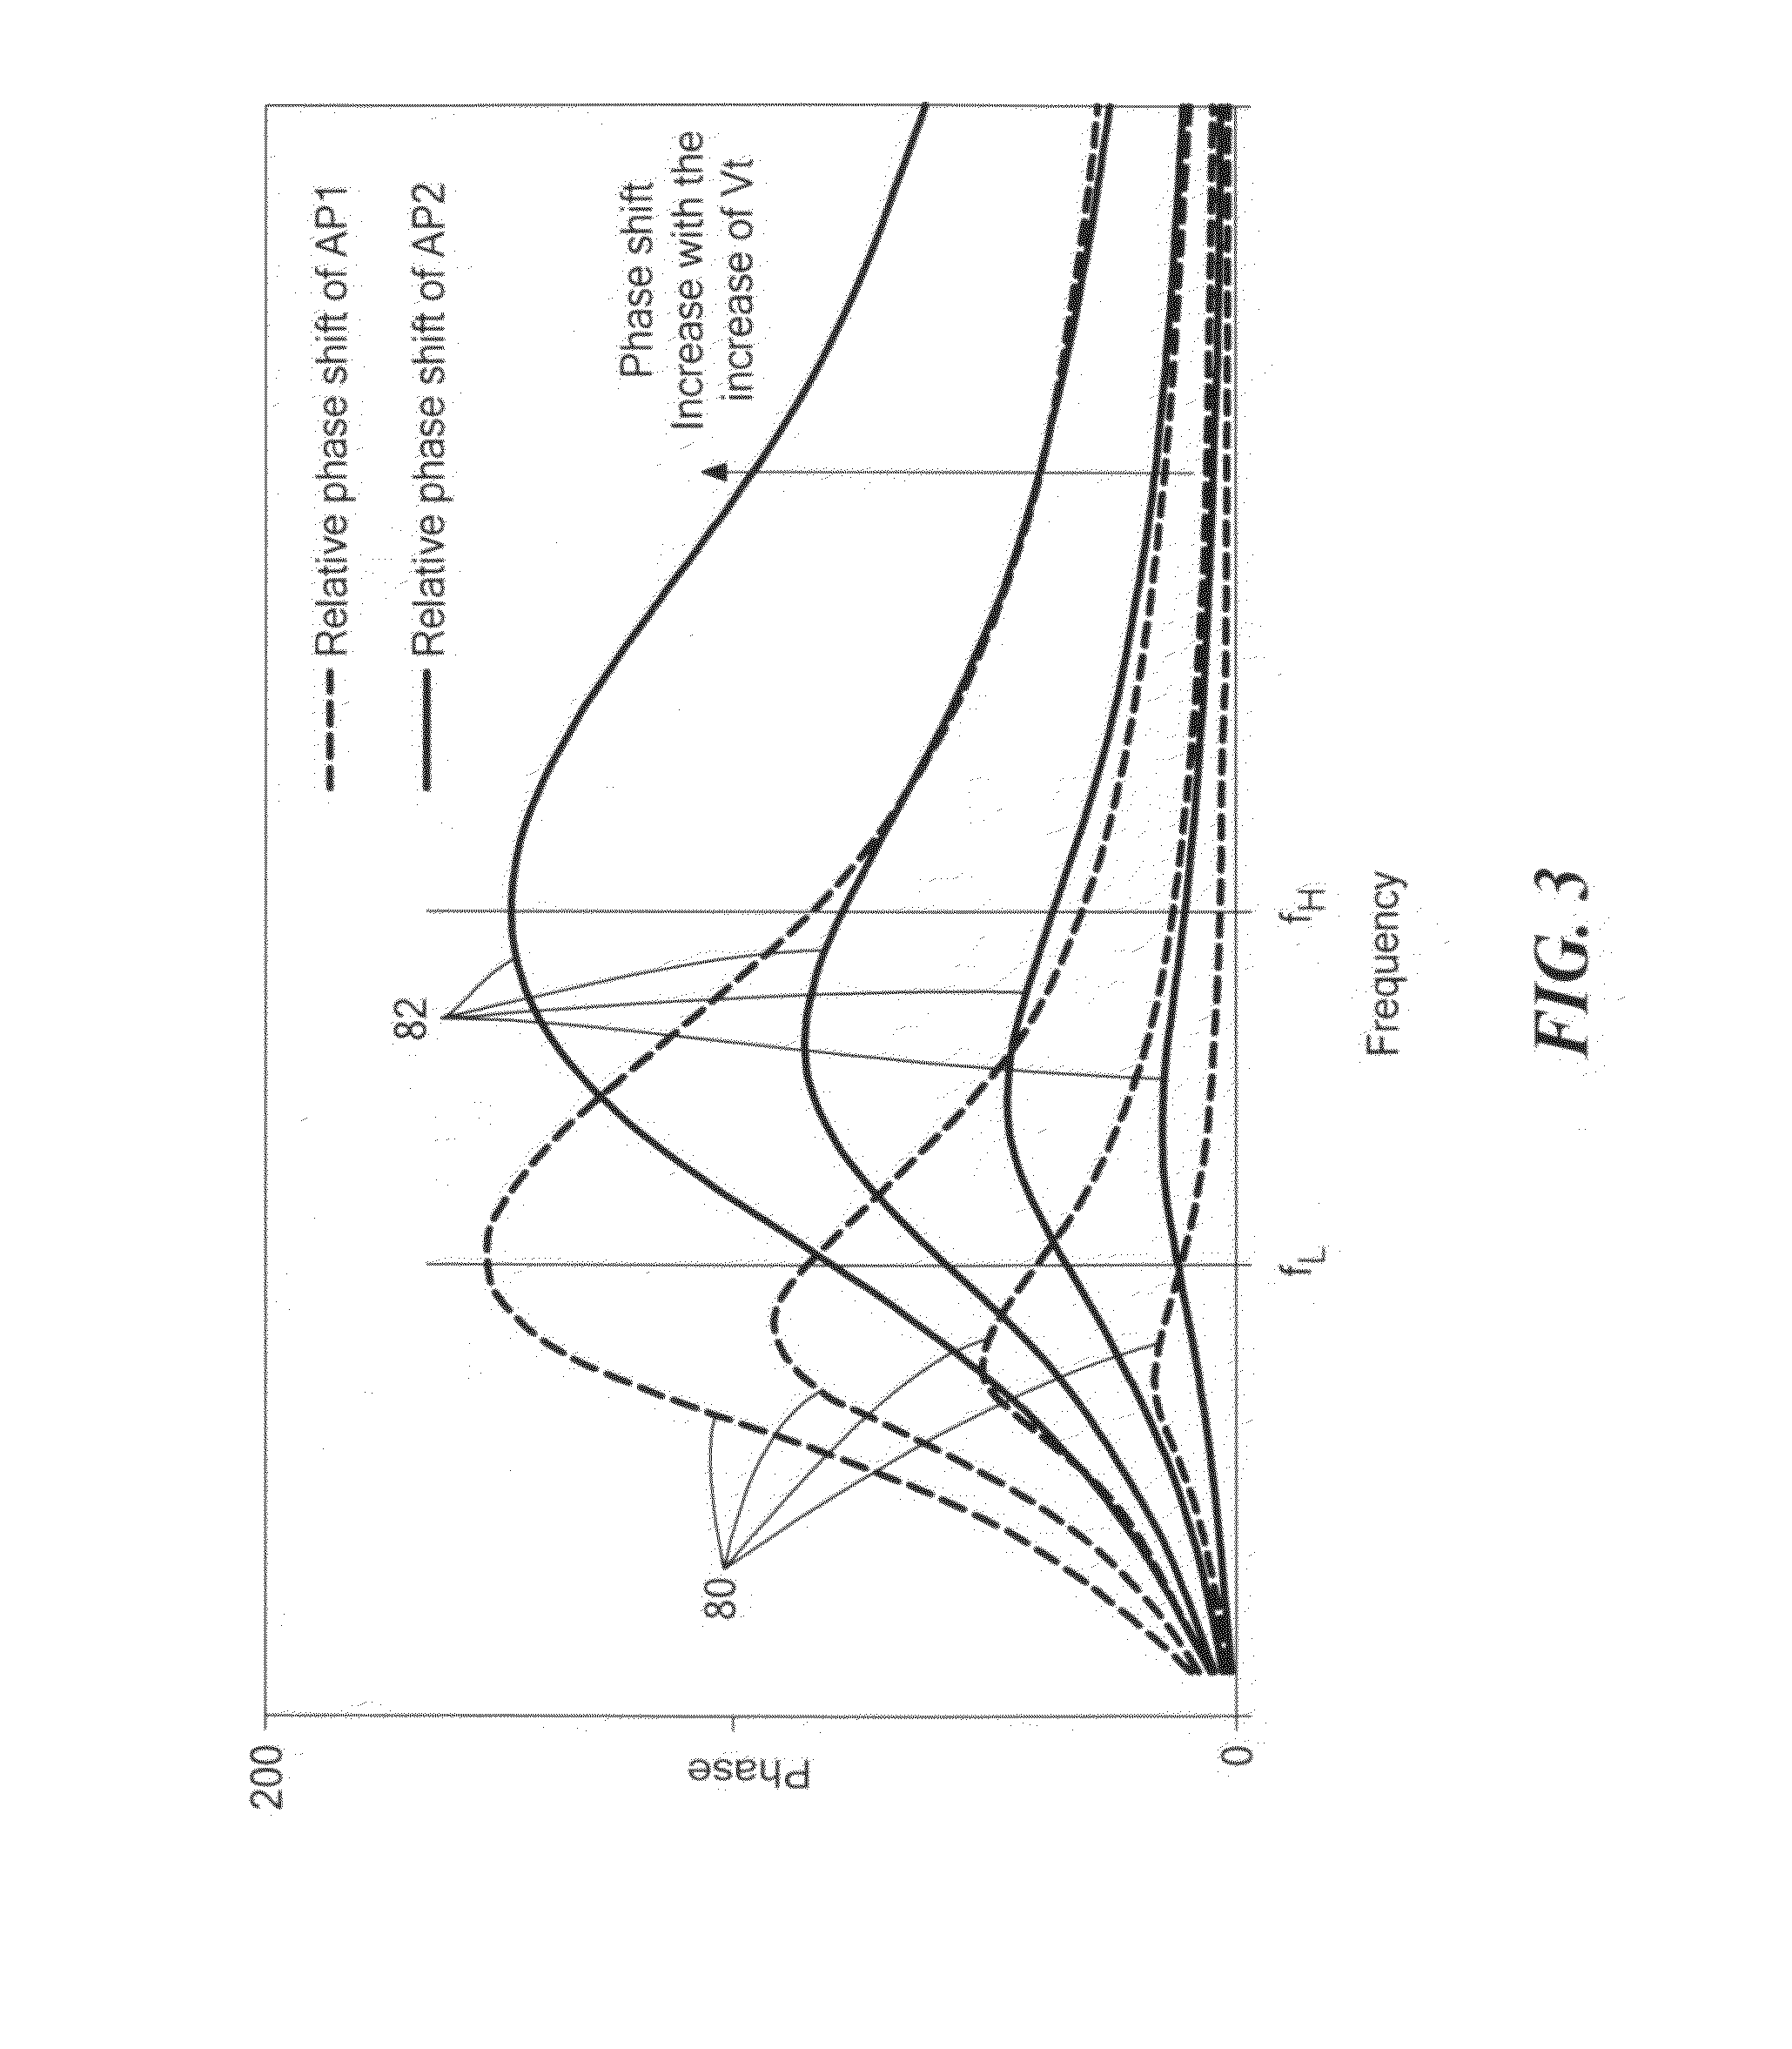 Absorptive tunable bandstop filter with wide tuning range and electrically tunable all-pass filter useful therein